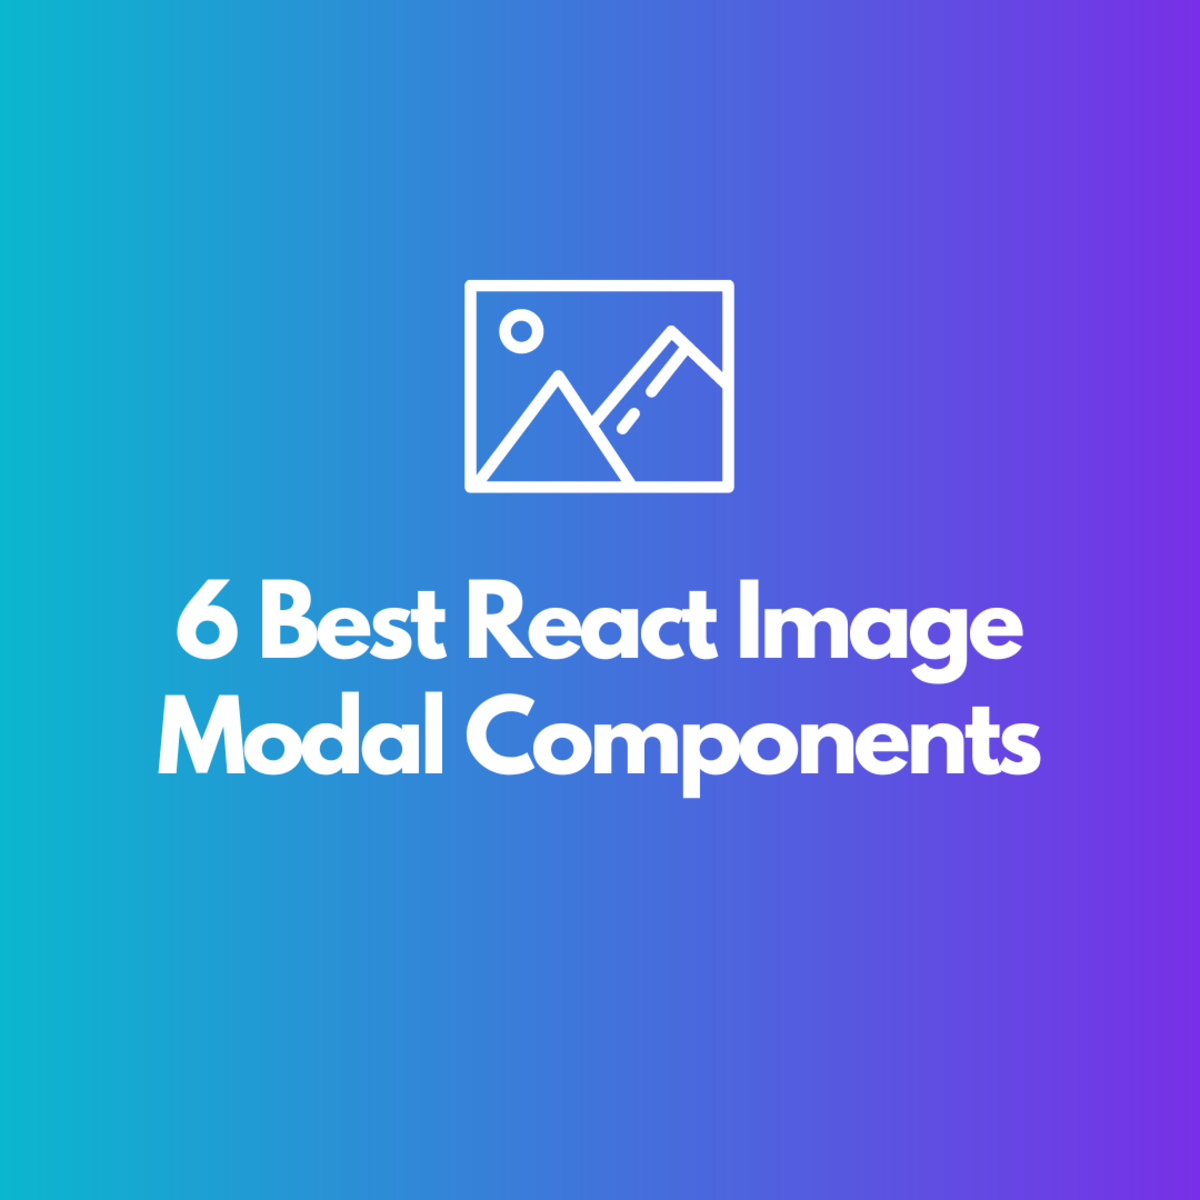 Discover some of the best React image modal components in this ultimate list!